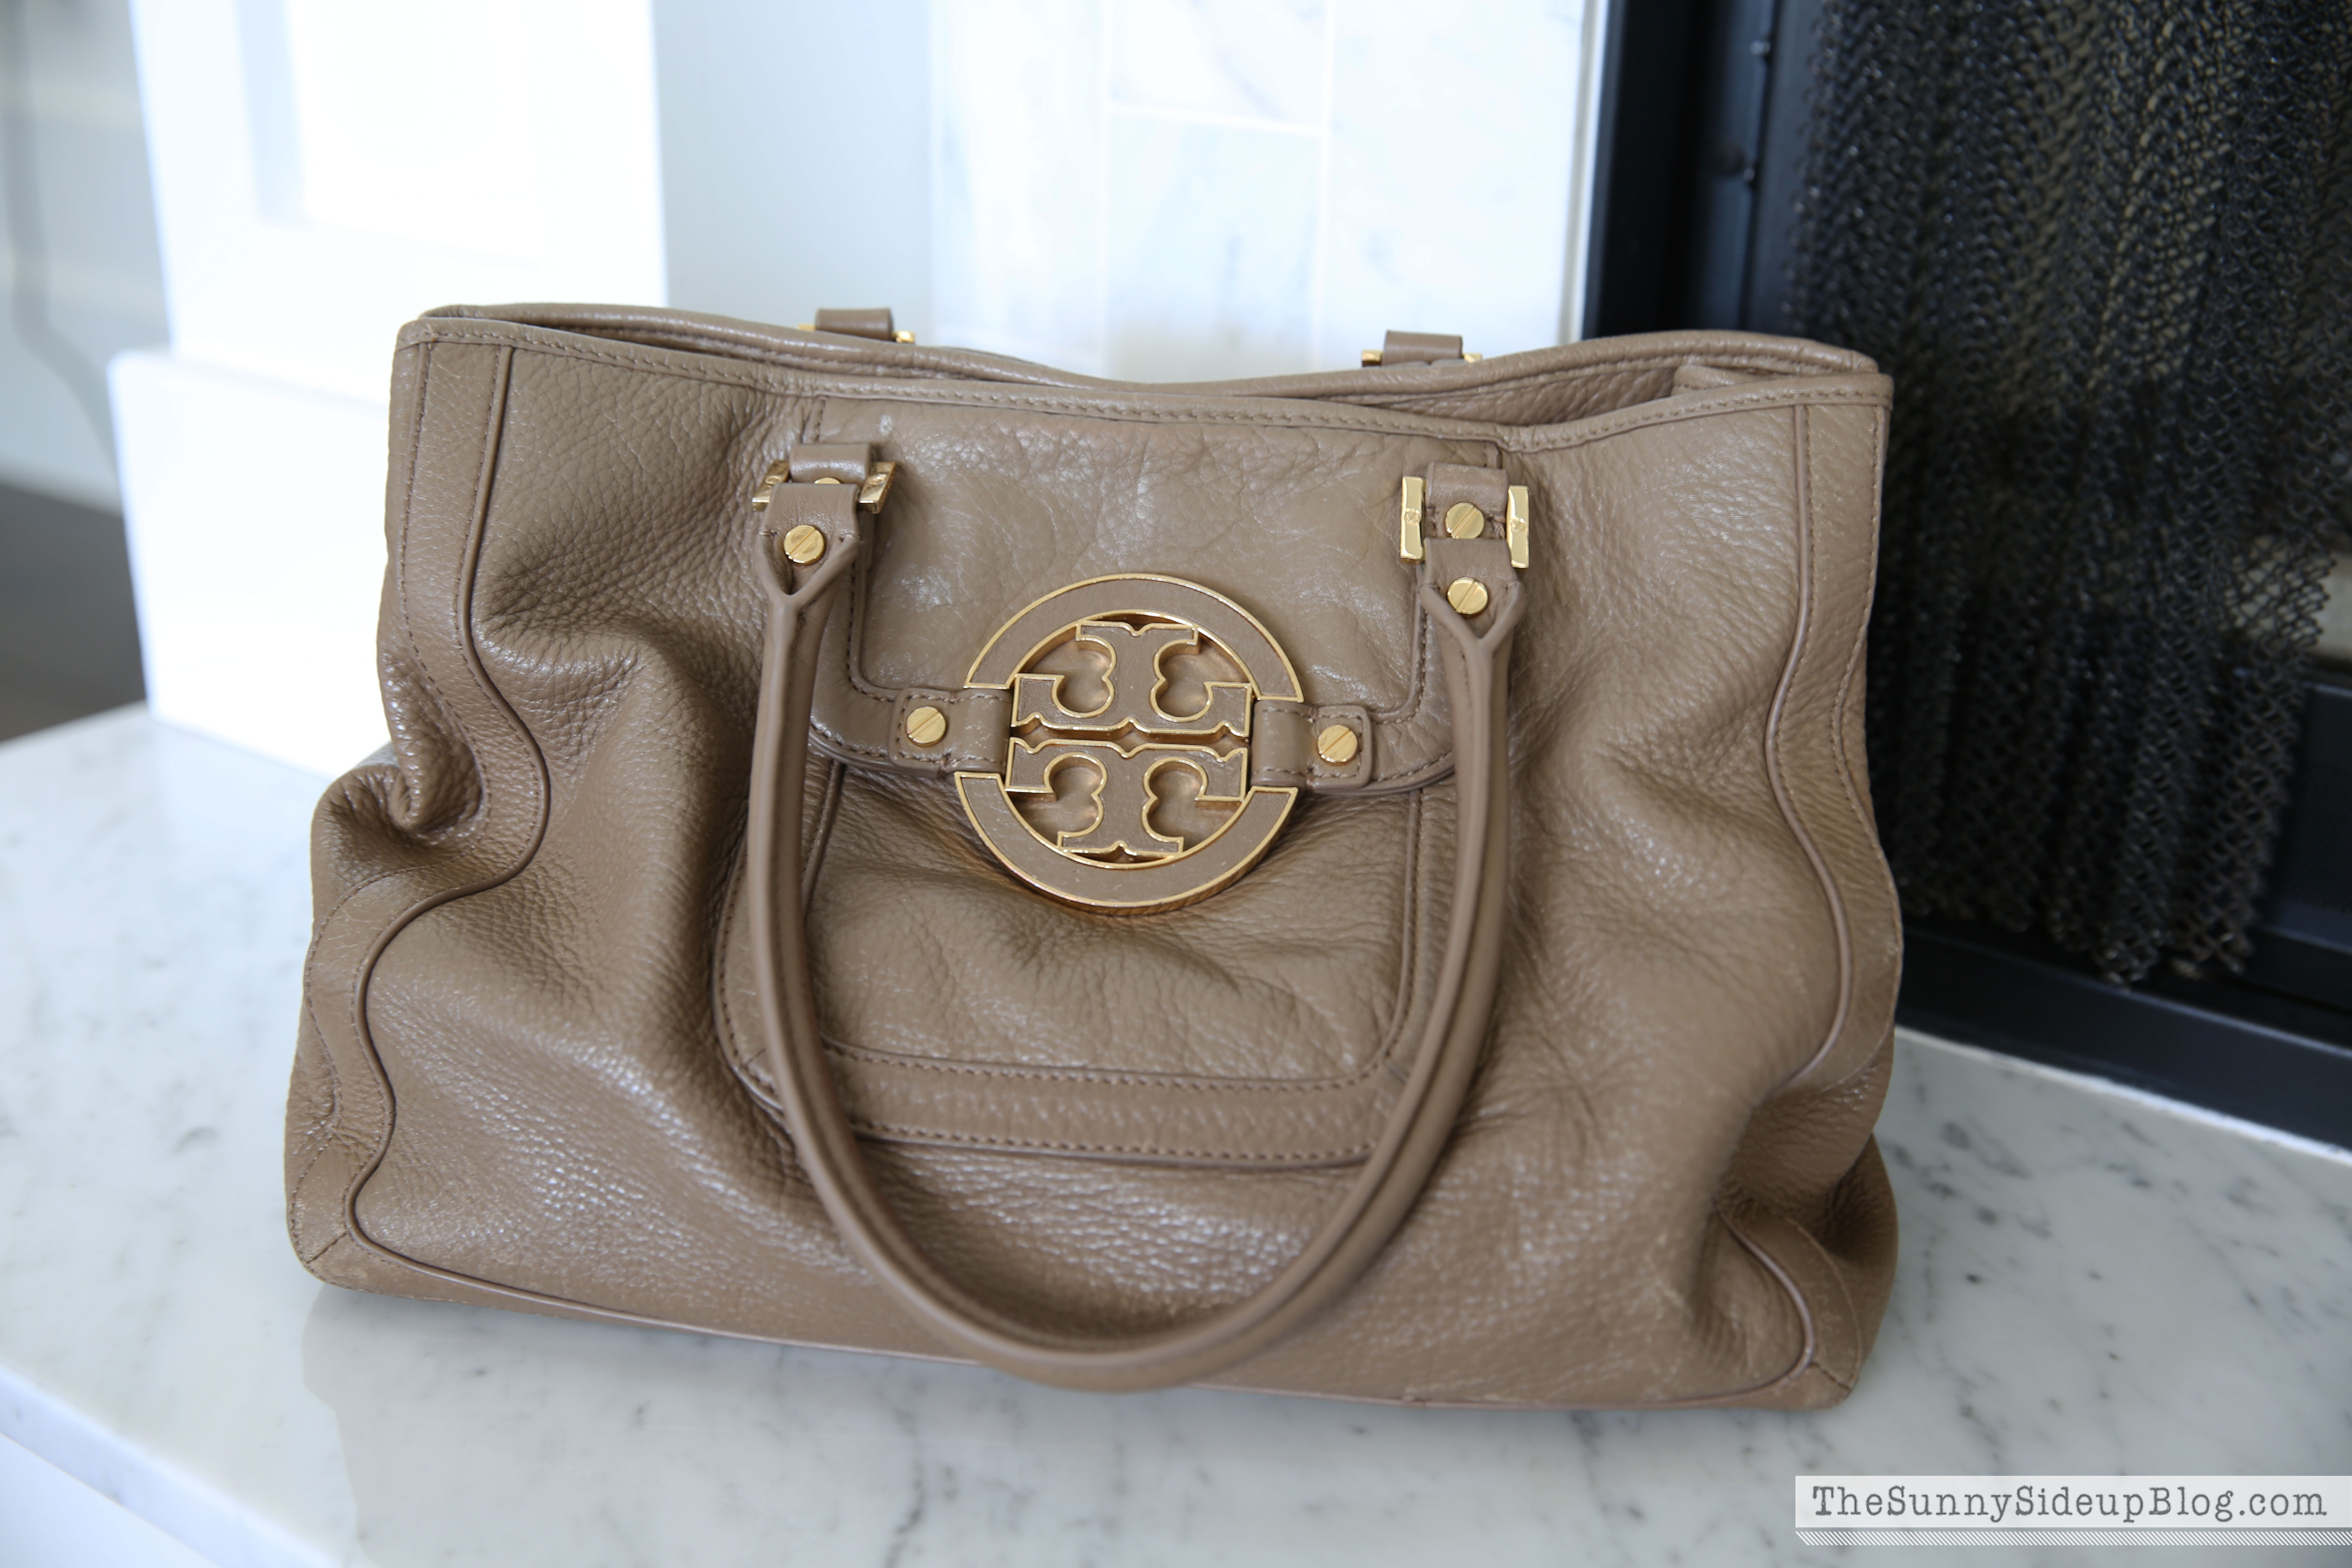 Buy online Tory Burch Crossbody Bag Premium Quality In Pakistan| Rs 7500 |  Best Price | find the best quality of Hand Bags, Handbag, Ladies Bags, Side  Bags, Clutches, Leather Bags, Purse,